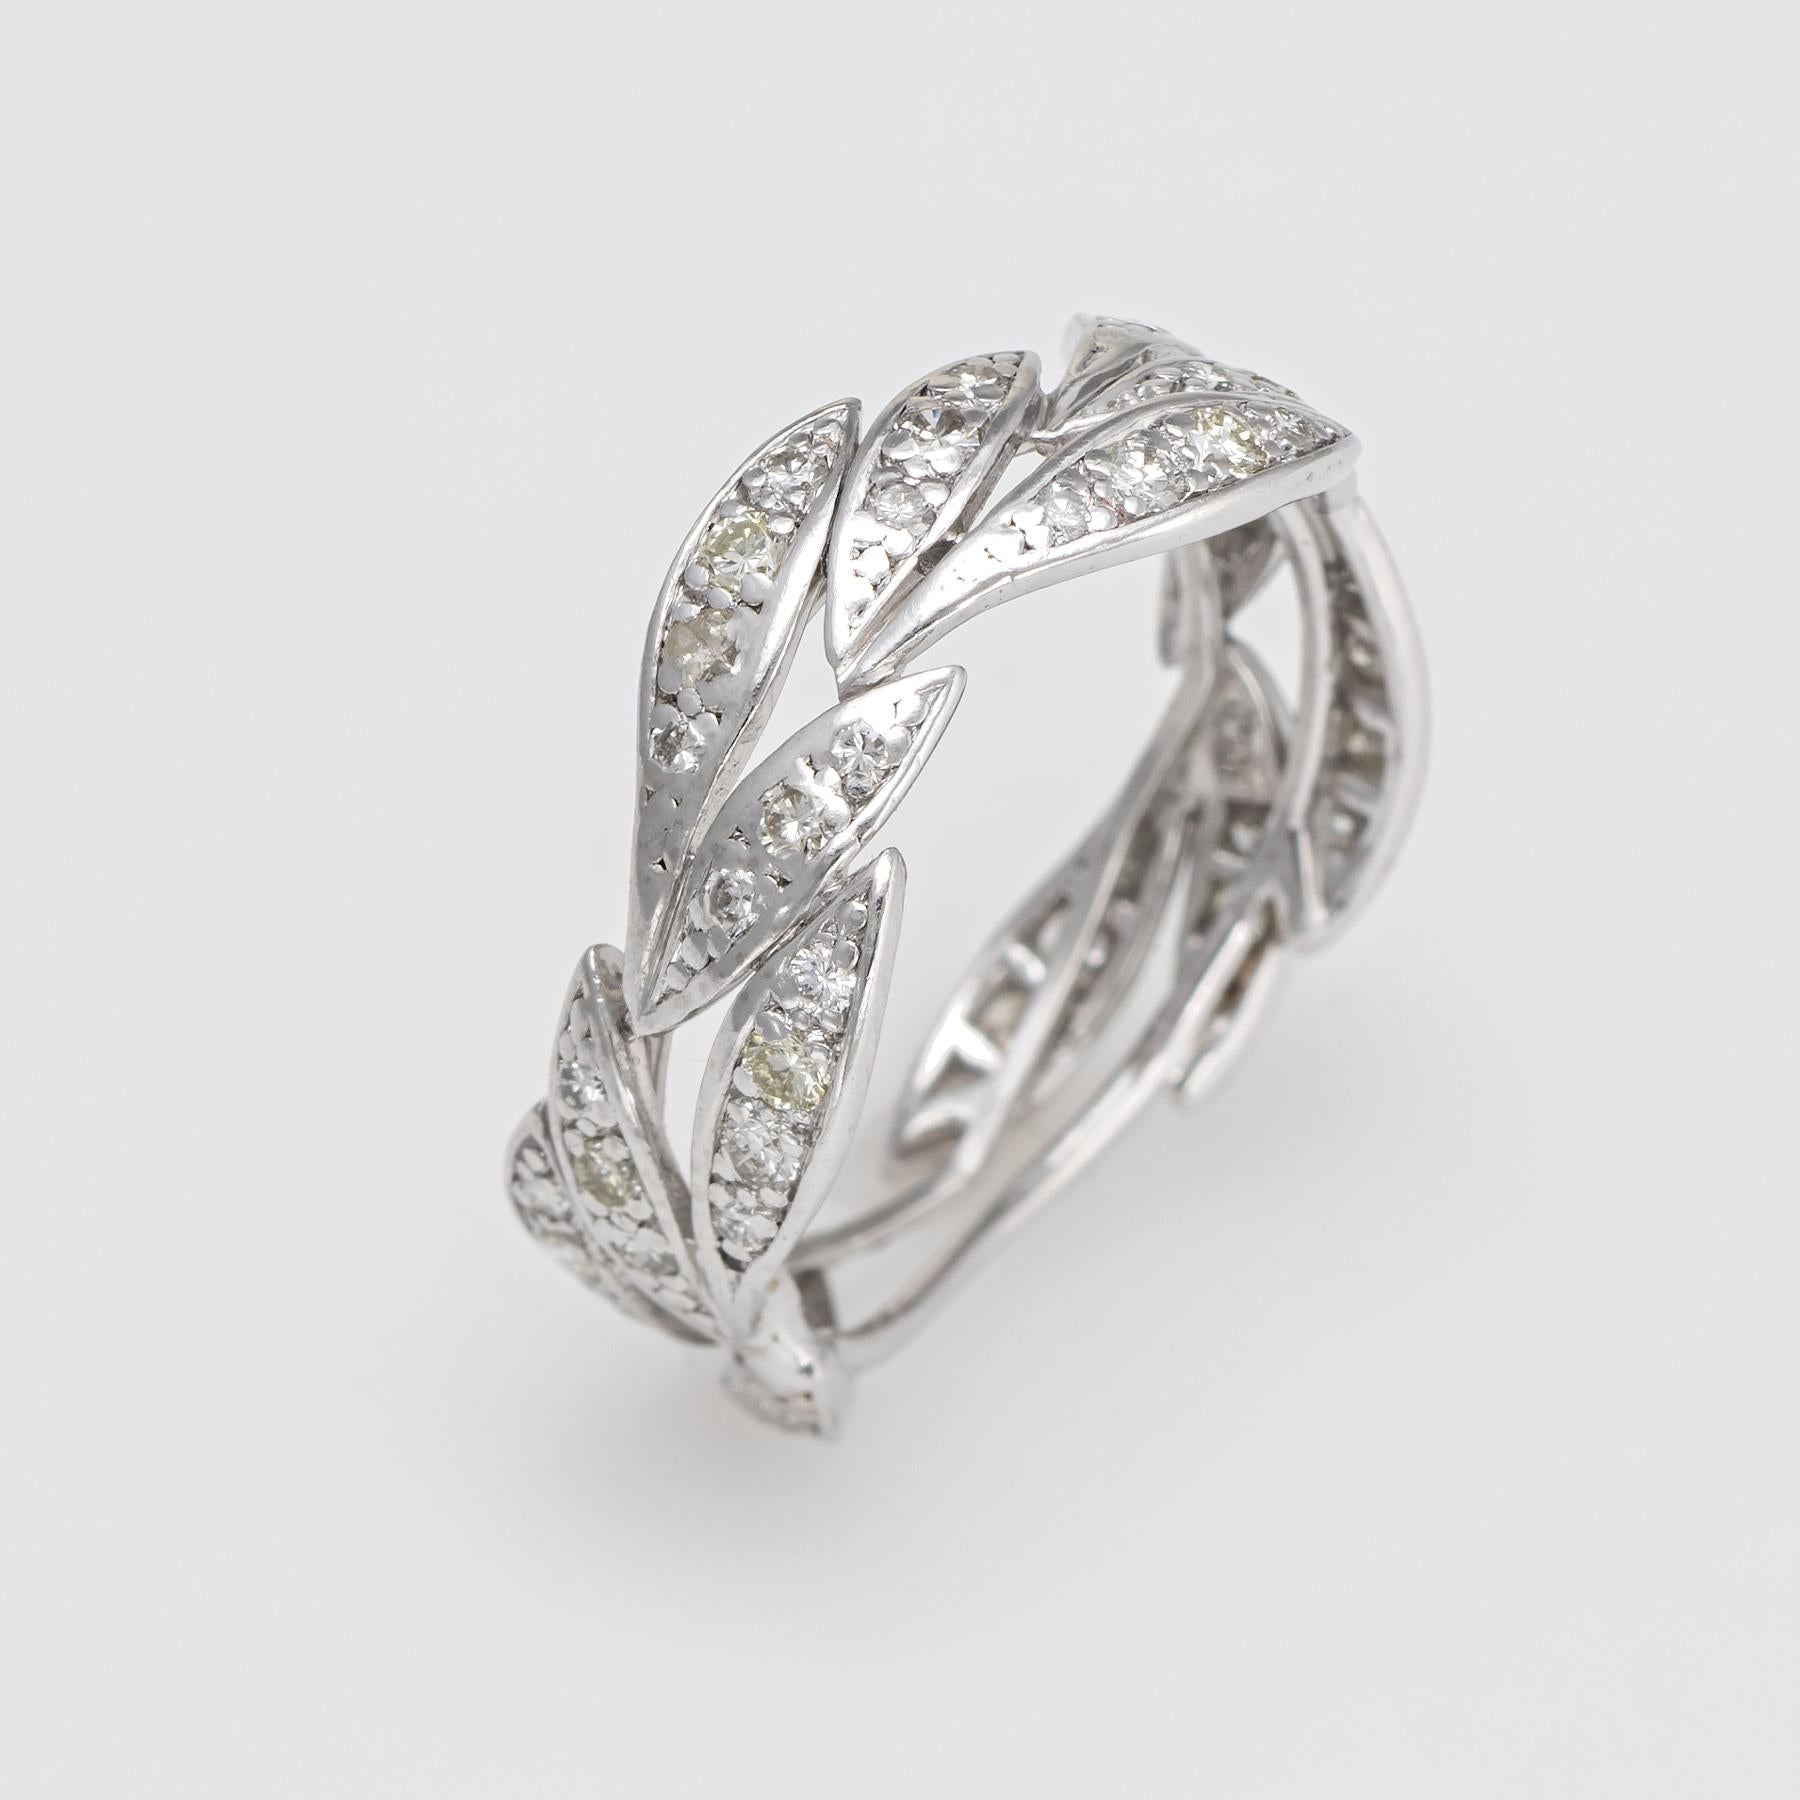 Finely detailed vintage diamond eternity ring, crafted in 900 platinum. 

A total of 49 round brilliant cut diamonds total an estimated 0.55 carats (estimated at J-K color and SI1-I1 clarity). 

The stylized leaf band gracefully hugs the finger. It